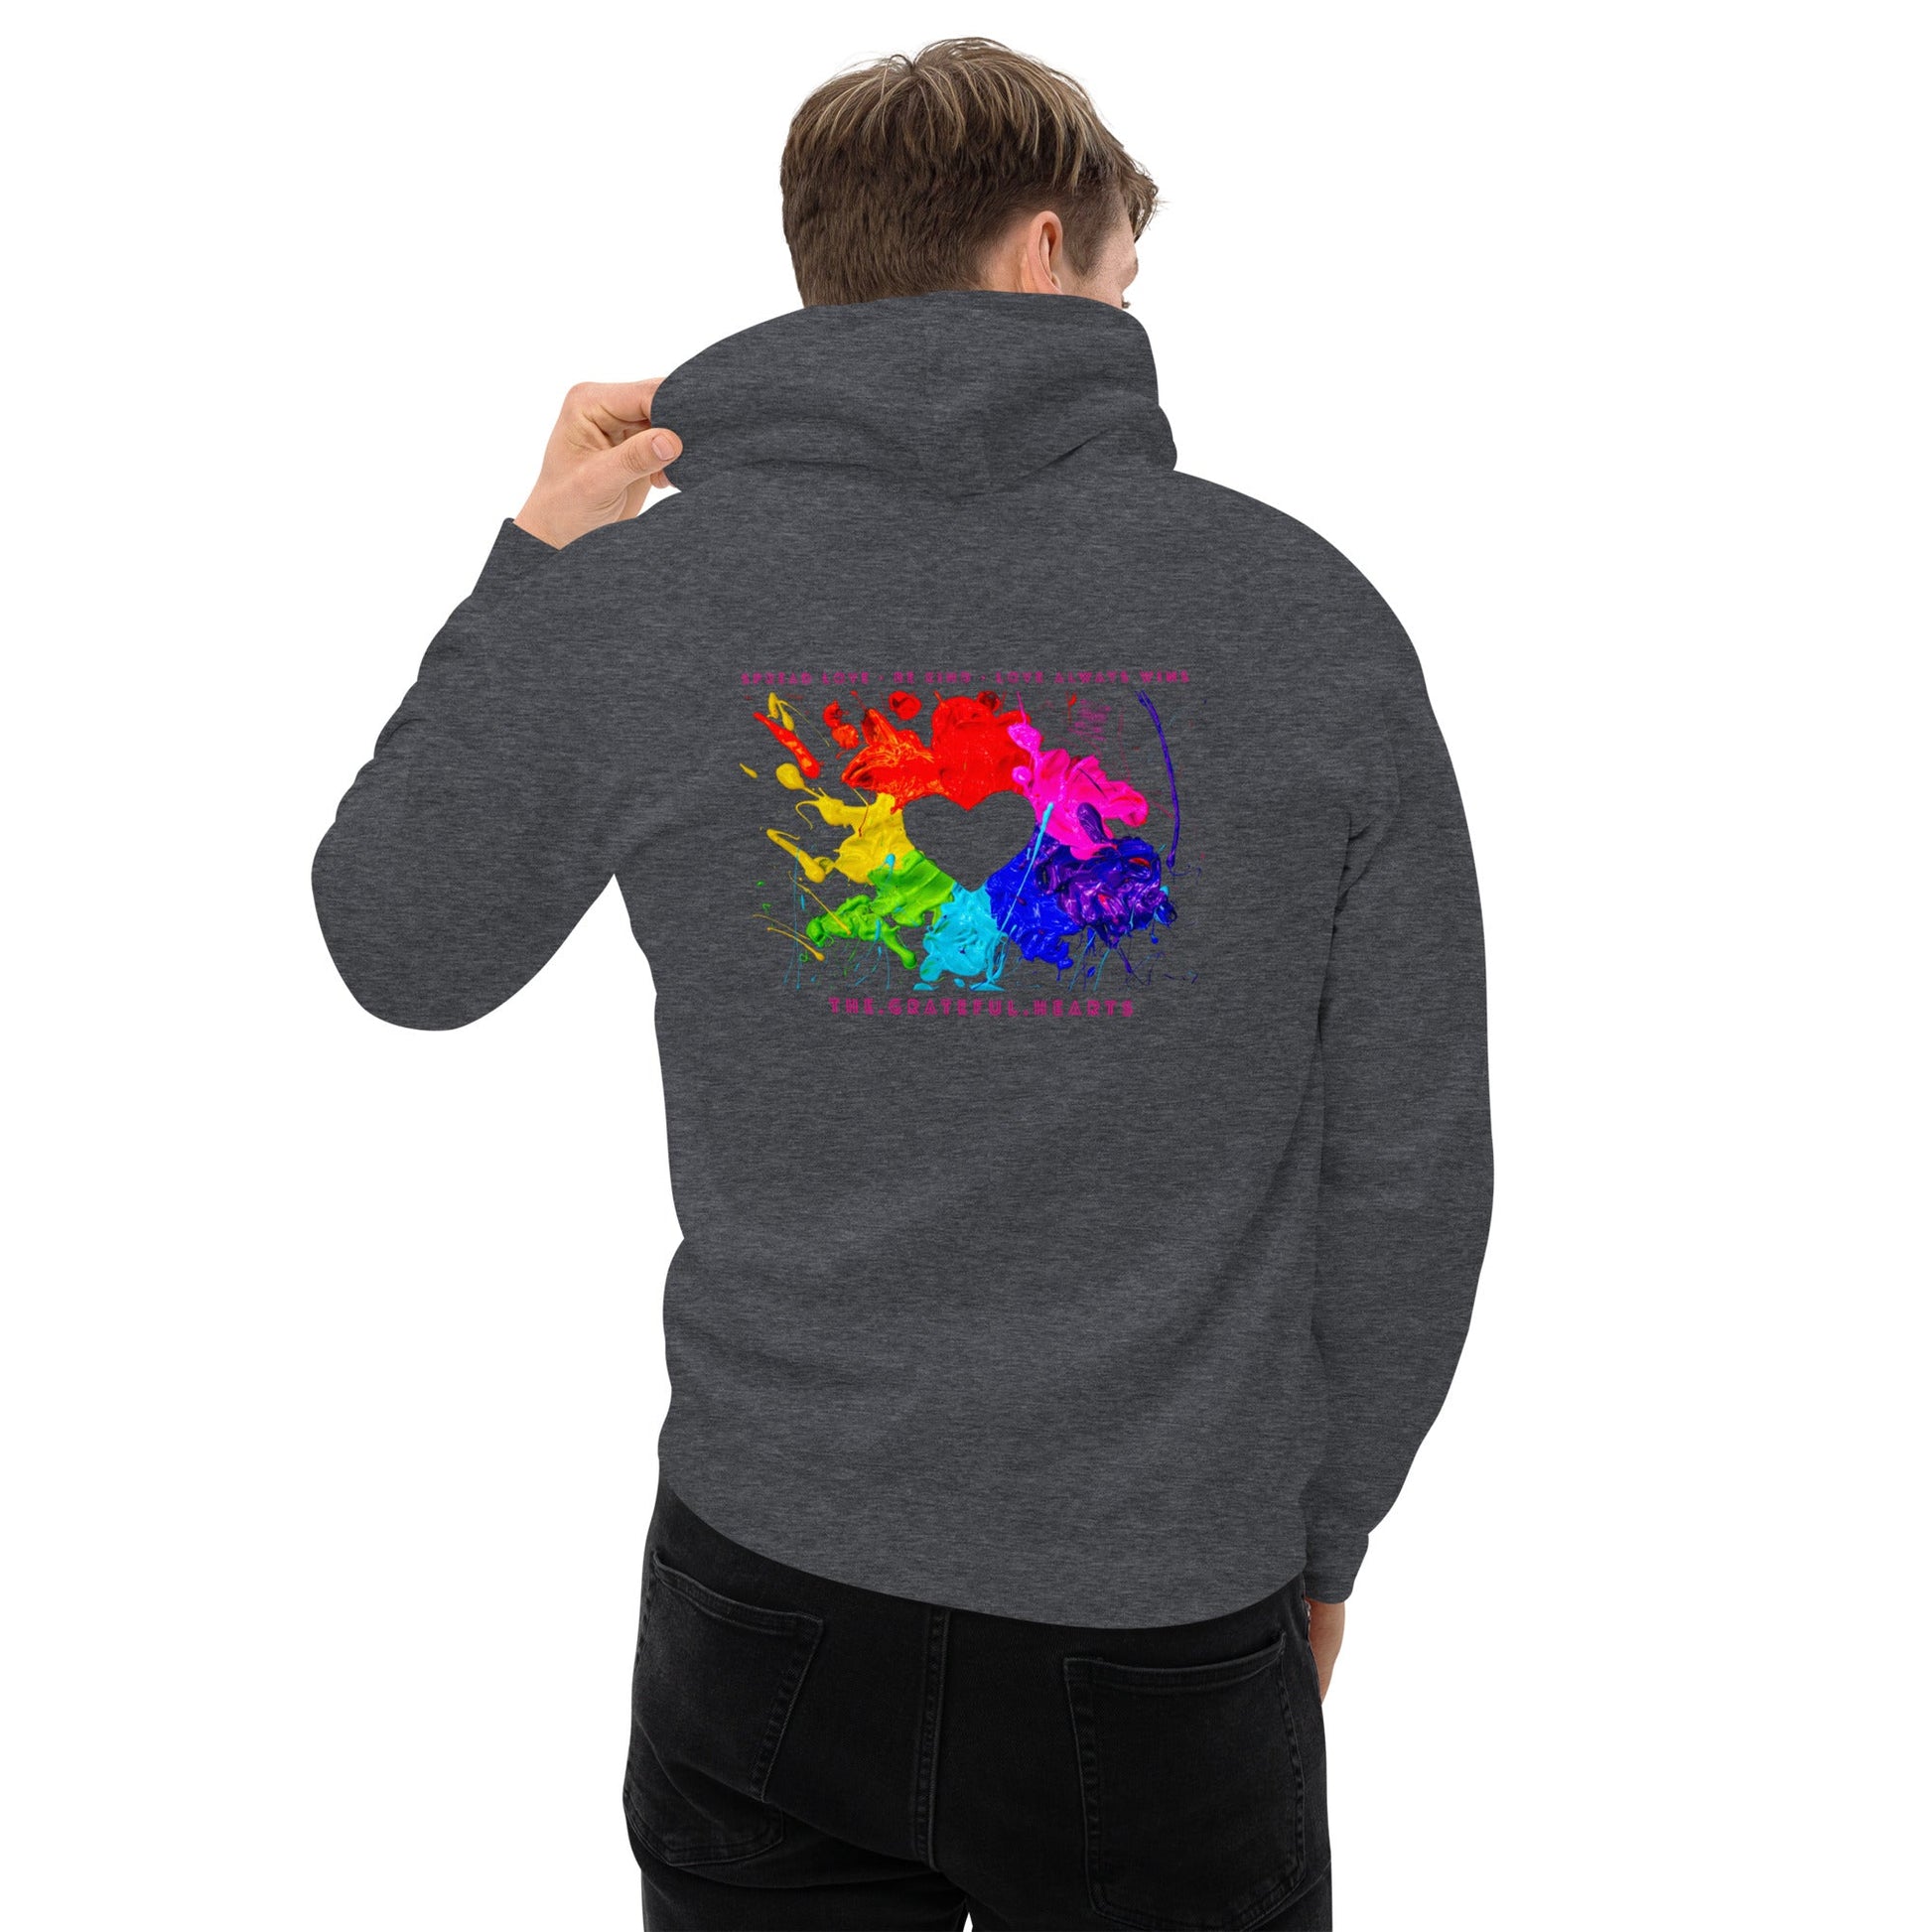 Heart Splash Heavy Blend Unisex Hoodie (Various Colorways available) - The Grateful Hearts